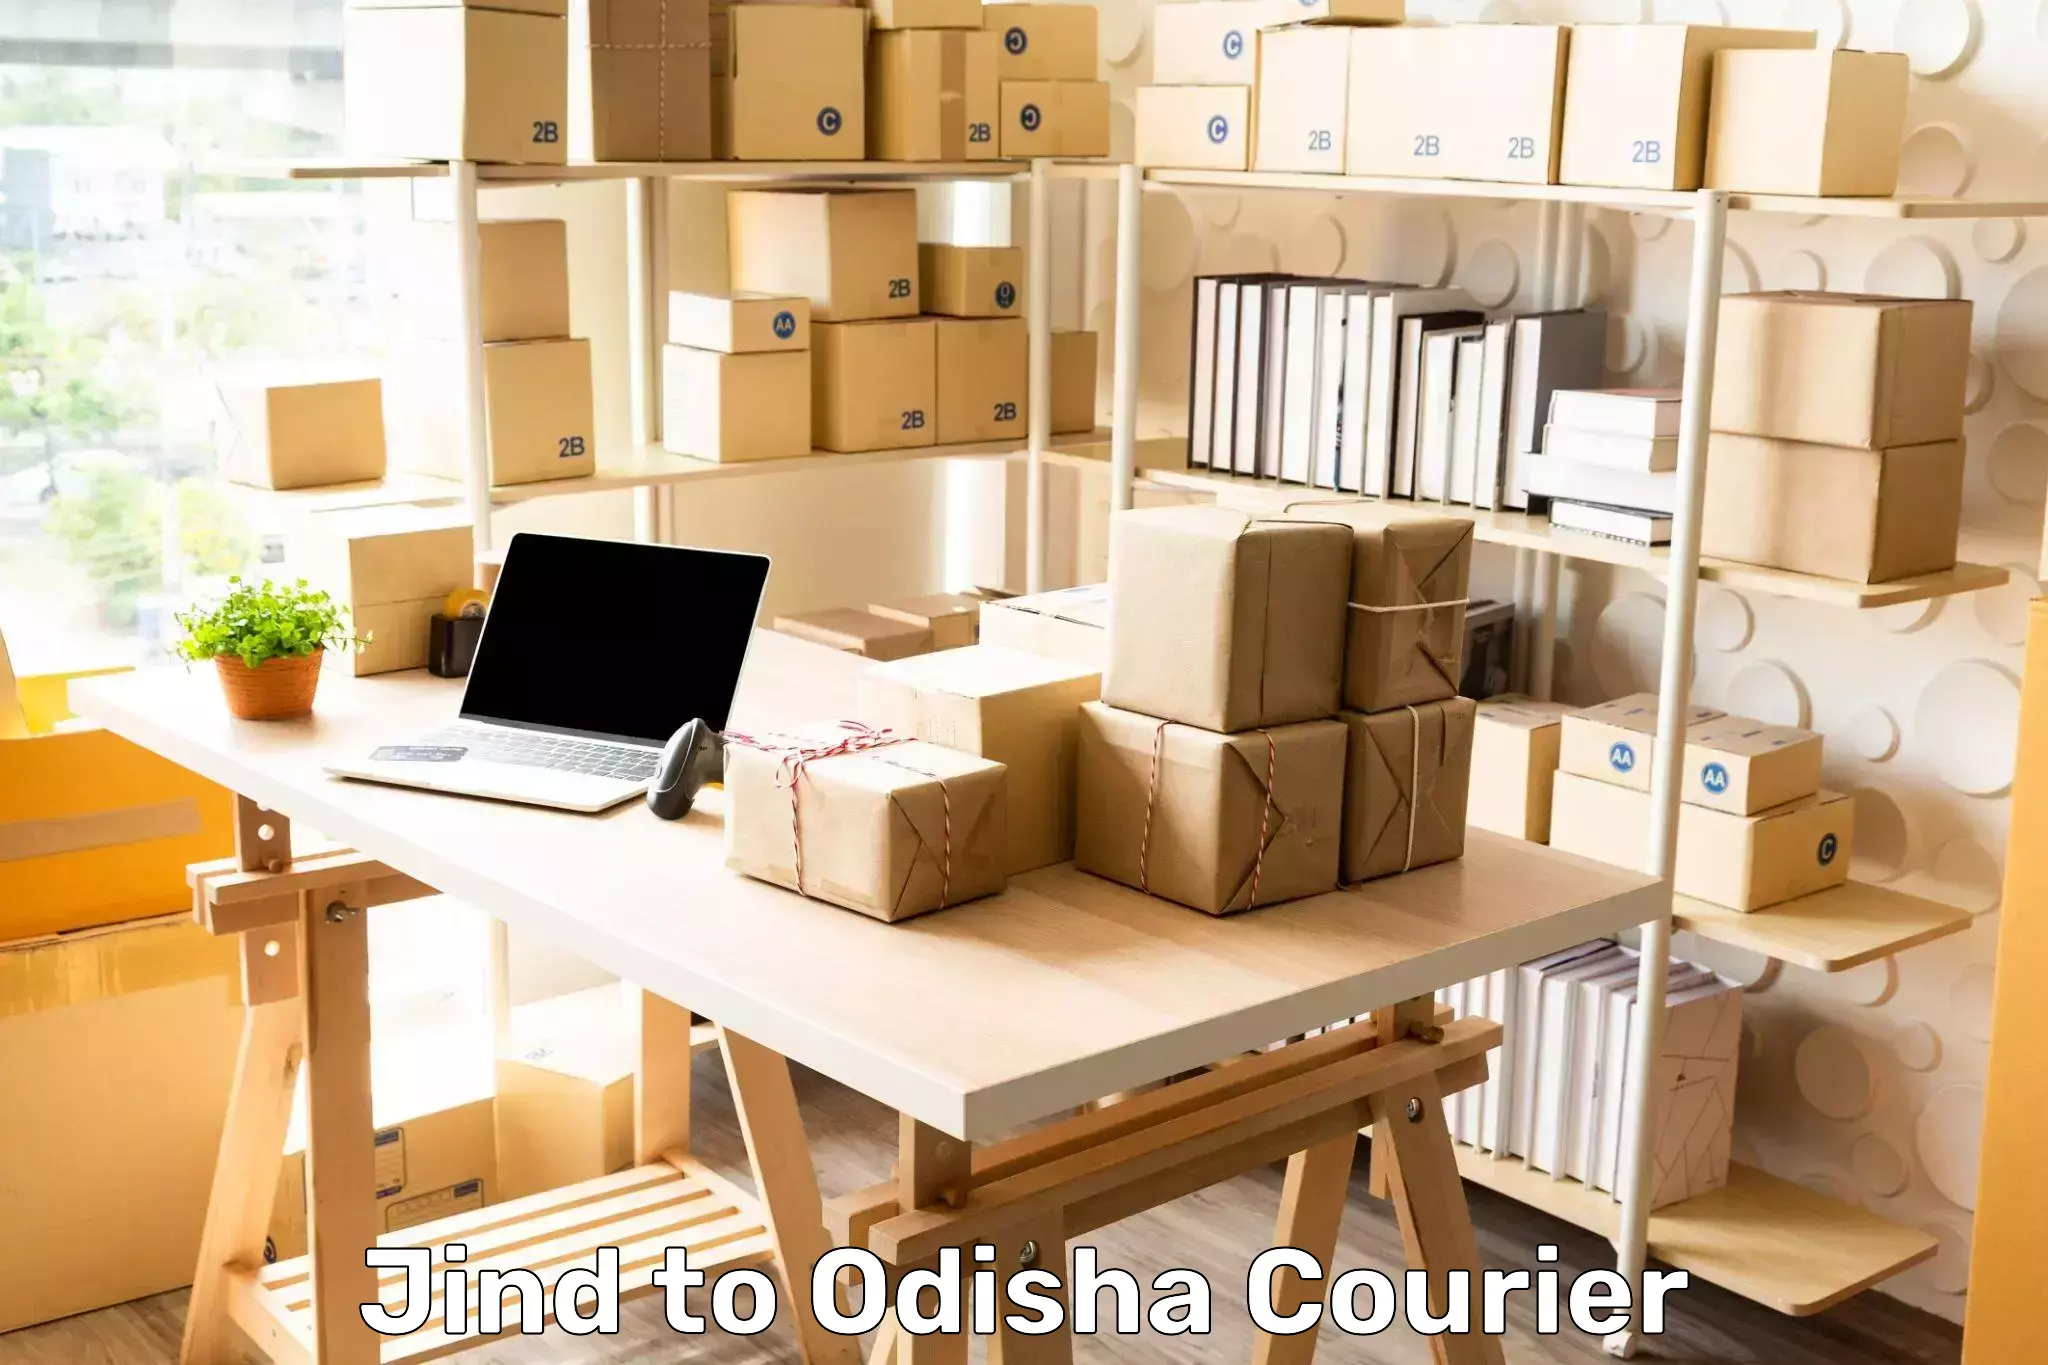 Express delivery capabilities Jind to Odisha